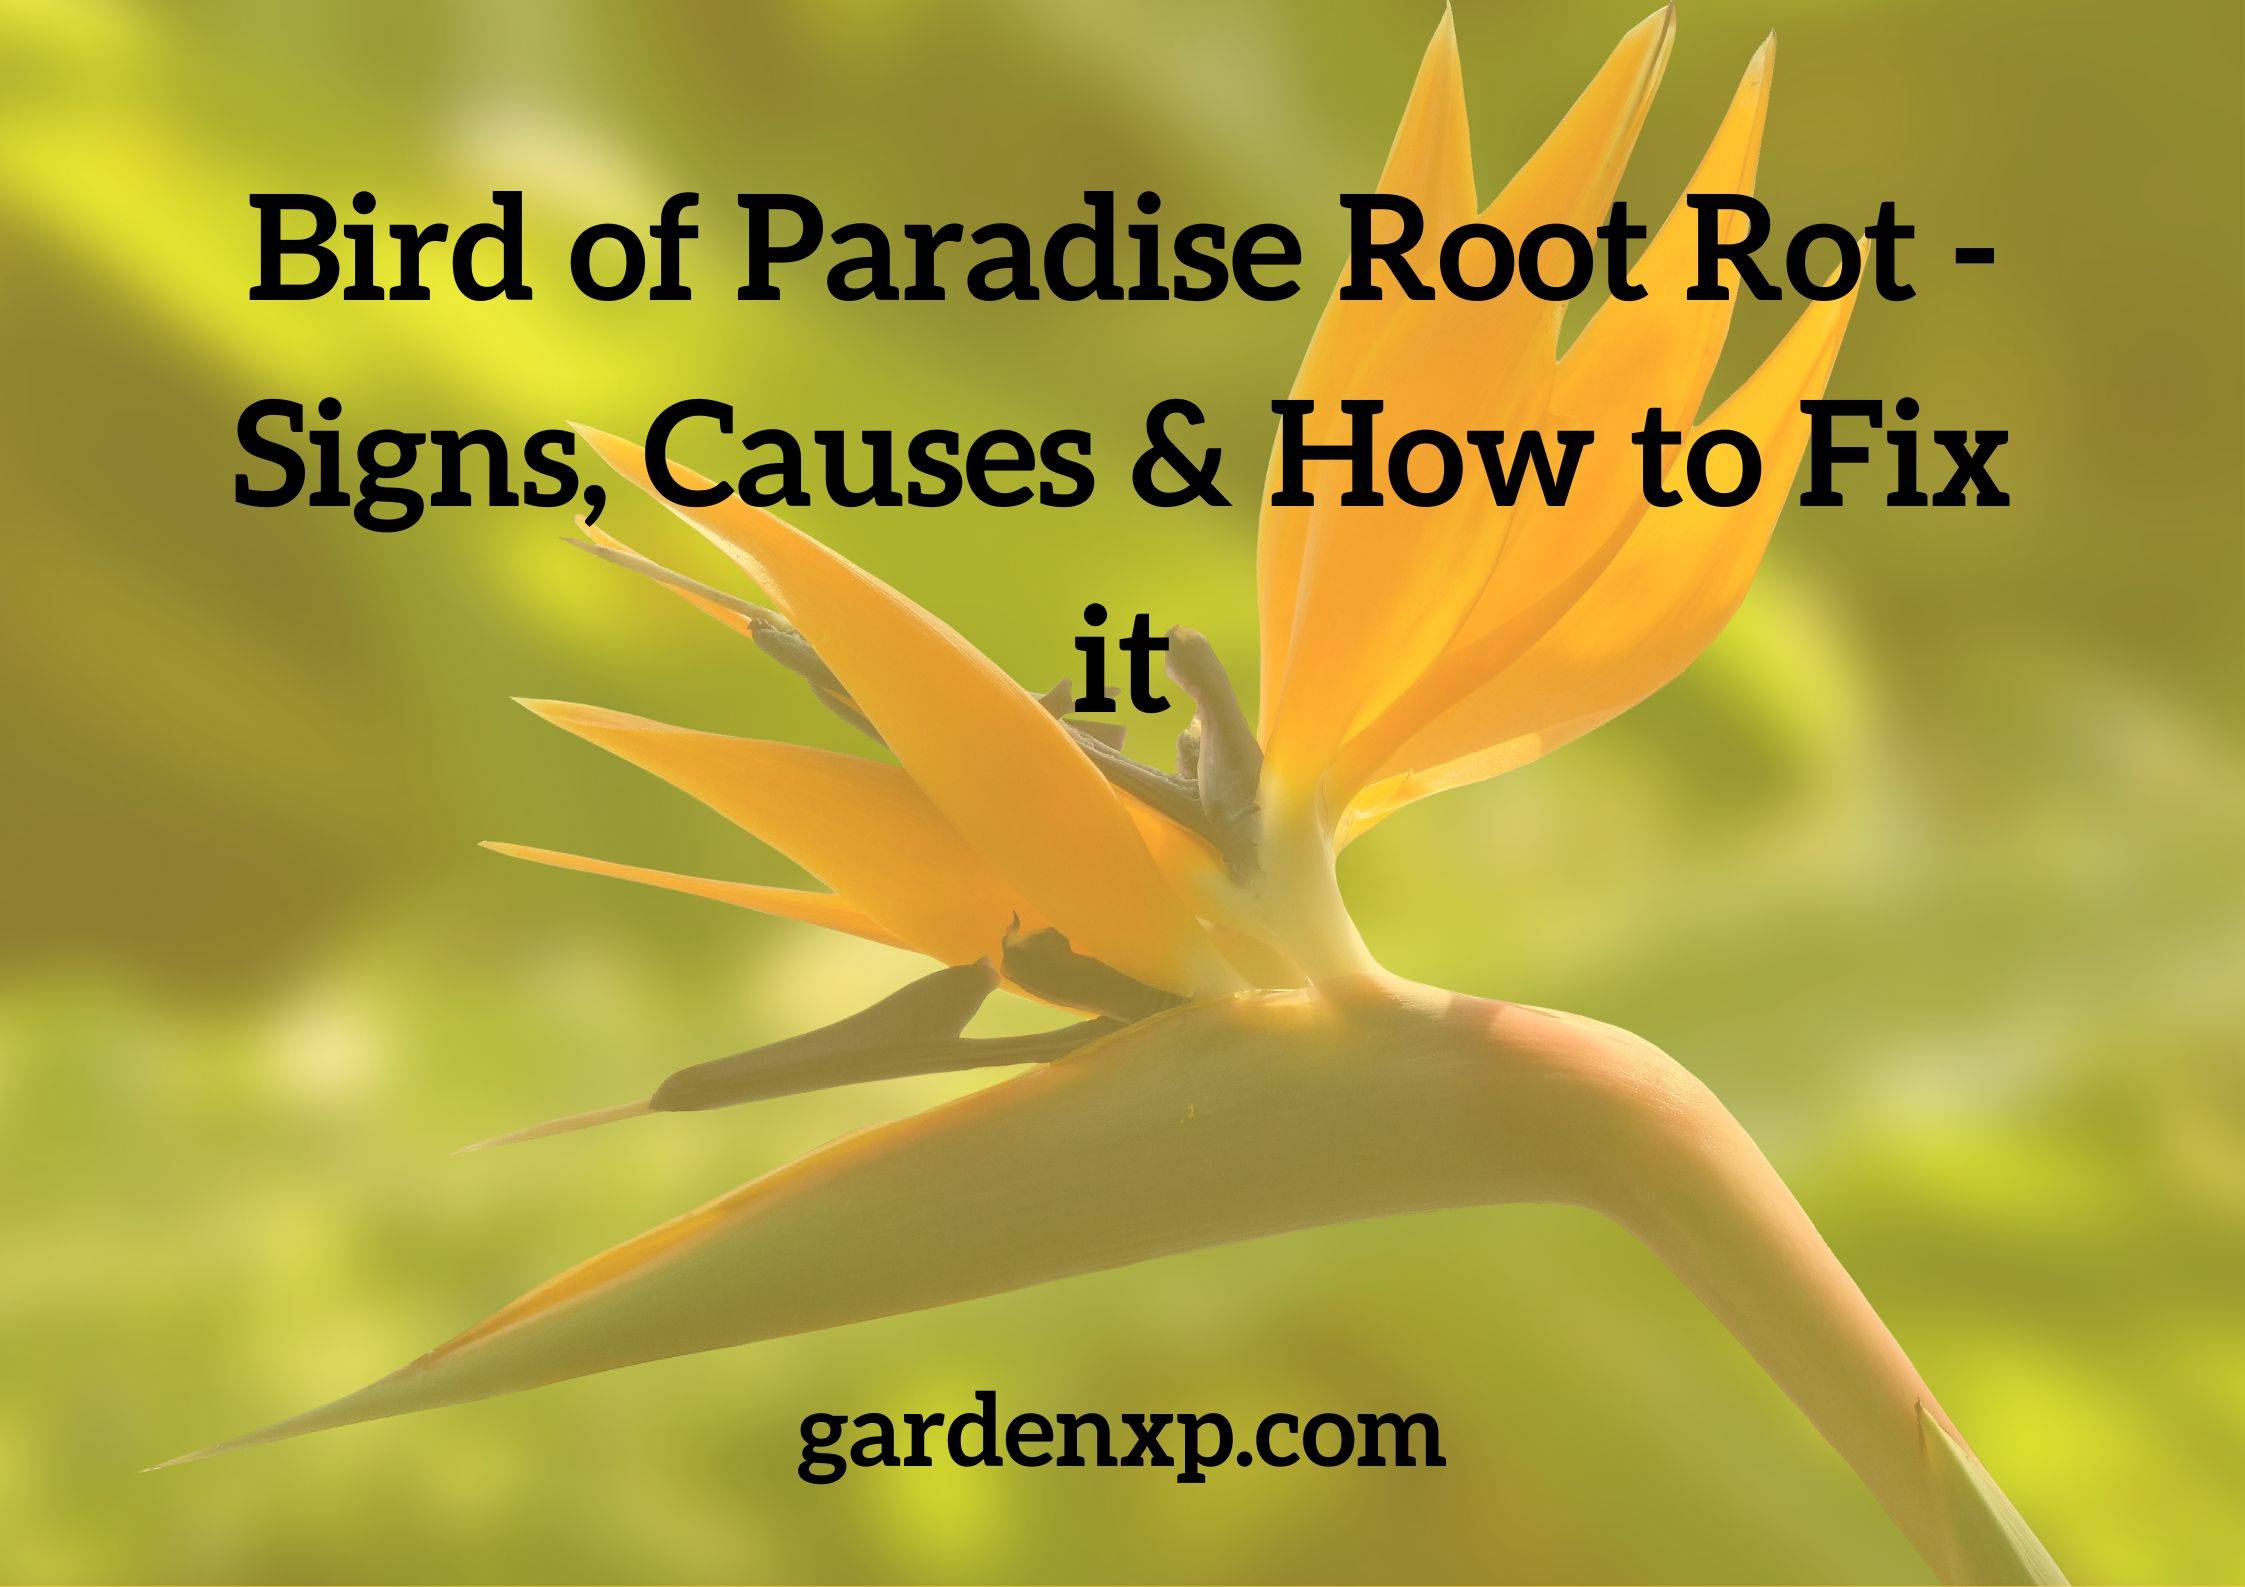 Bird of Paradise Root Rot - Signs Causes & How to Fix it